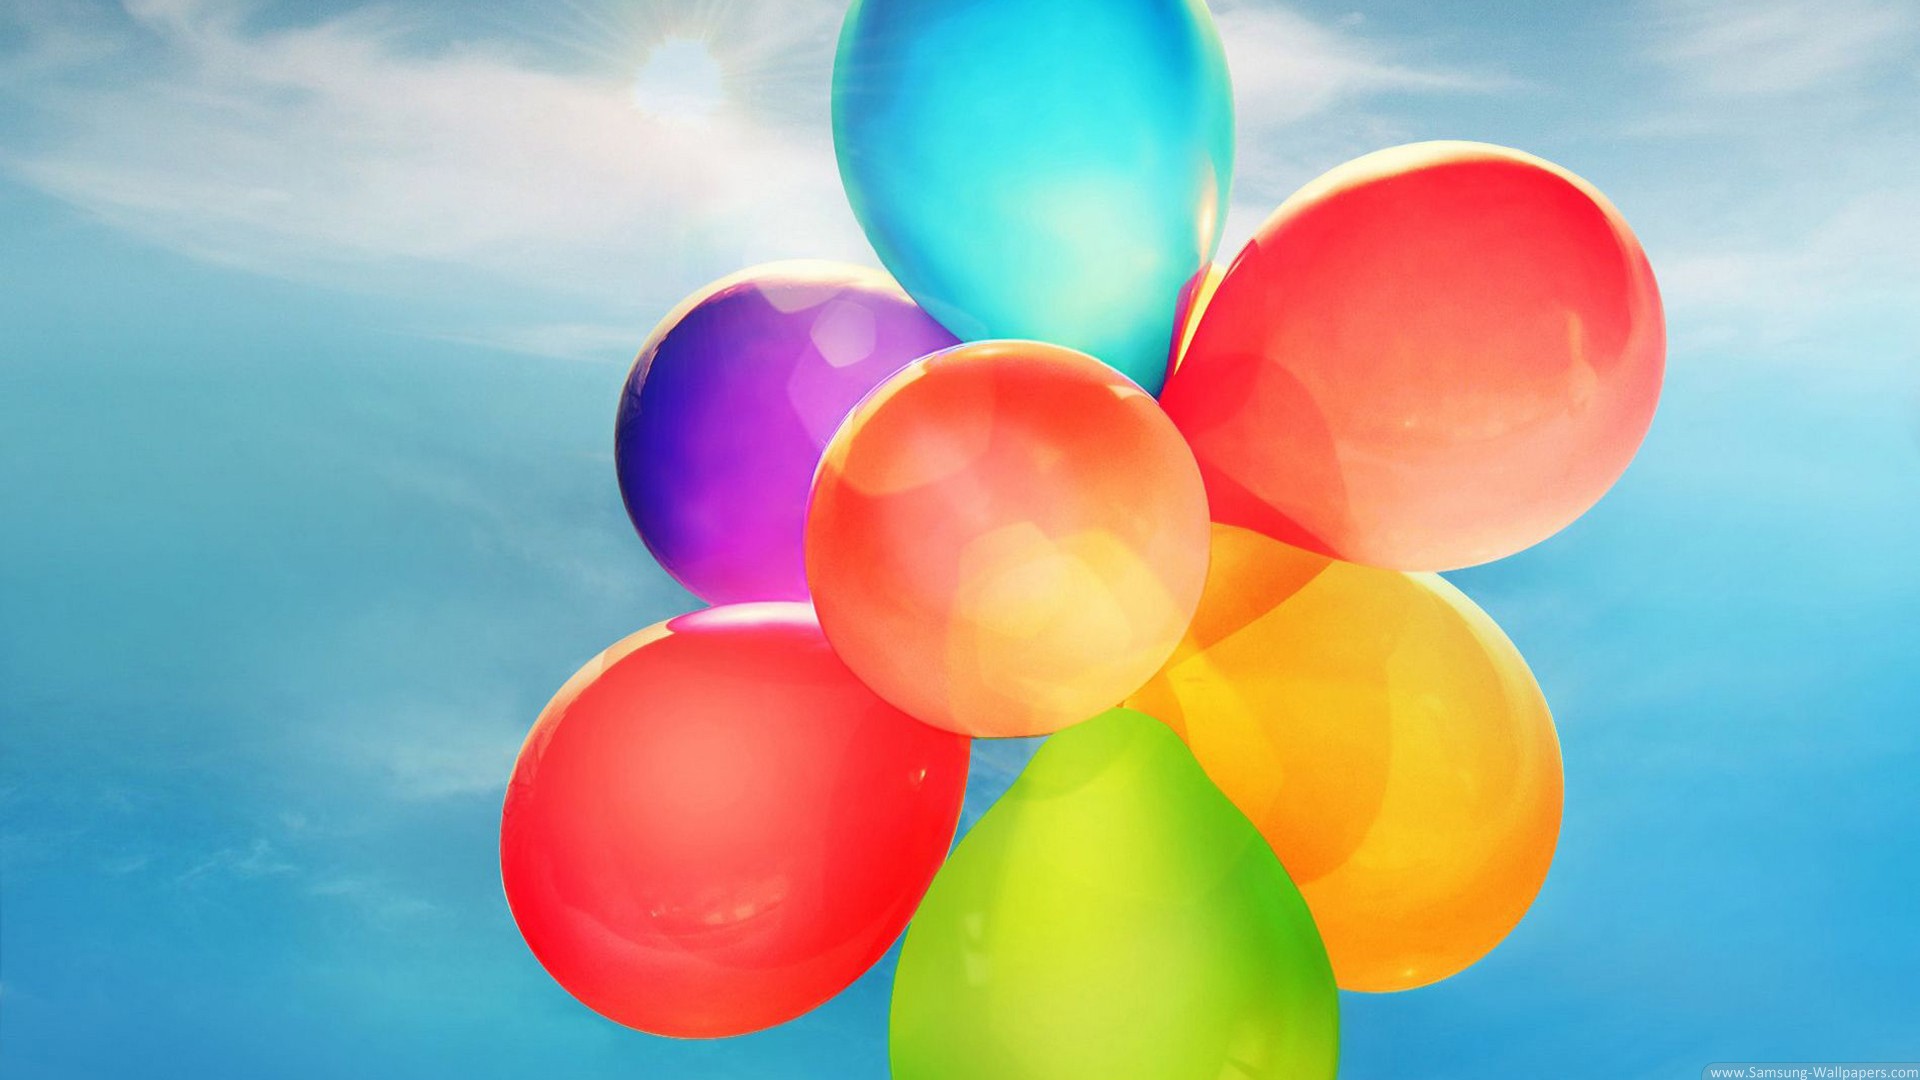 General 1920x1080 balloon colorful sky blue bright vibrant